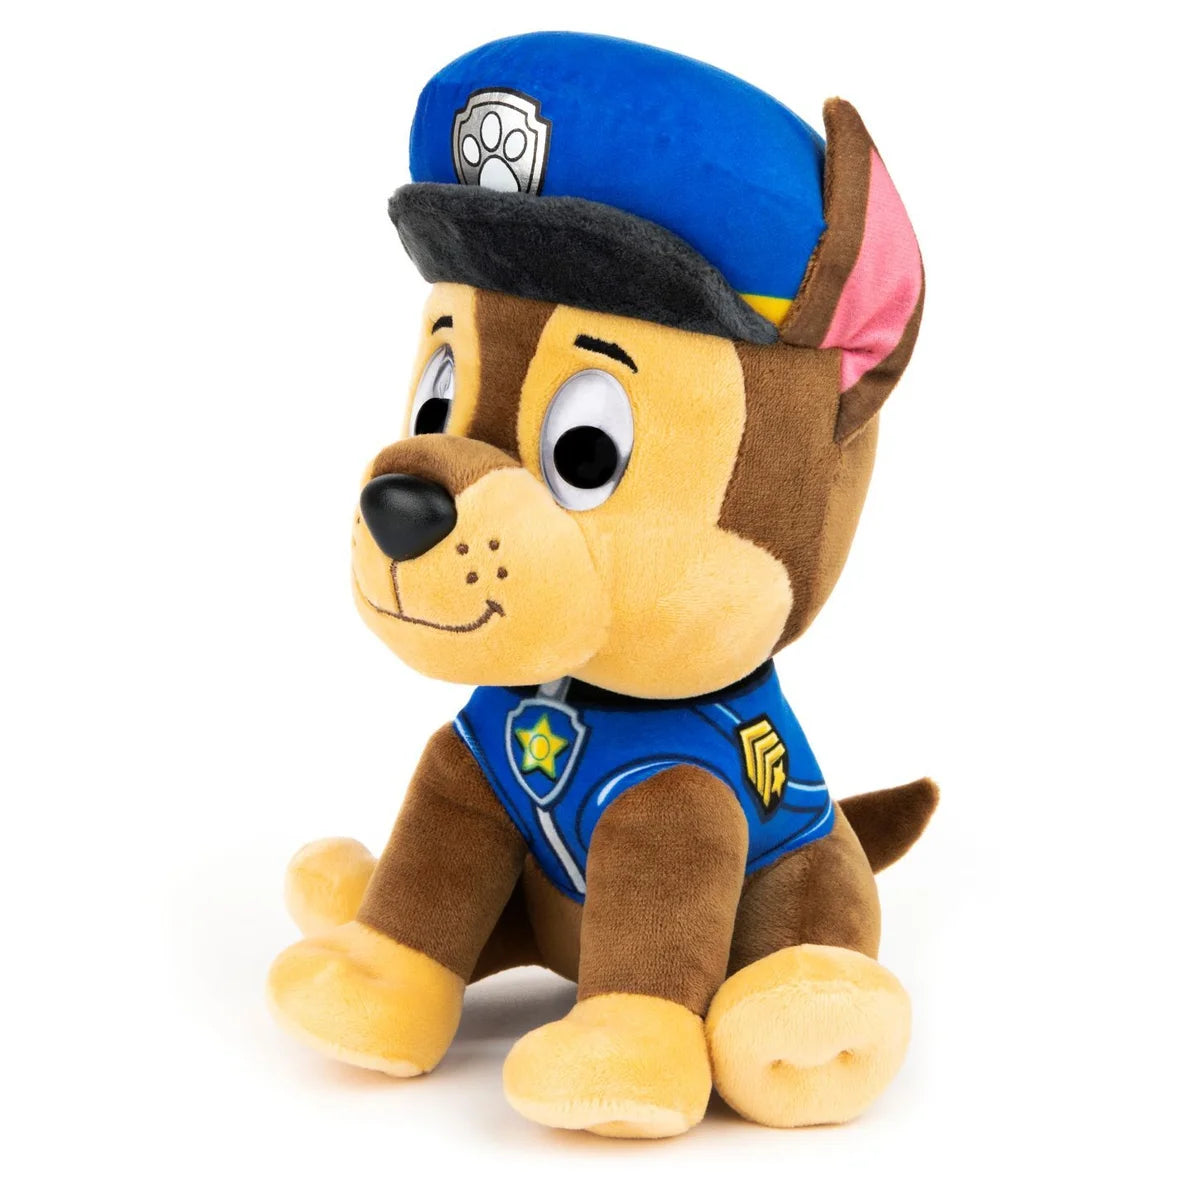 GUND Paw Patrol Chase in Signature Police Officer Uniform for Ages 1 and Up, 9" - Plush Toys Heretoserveyou